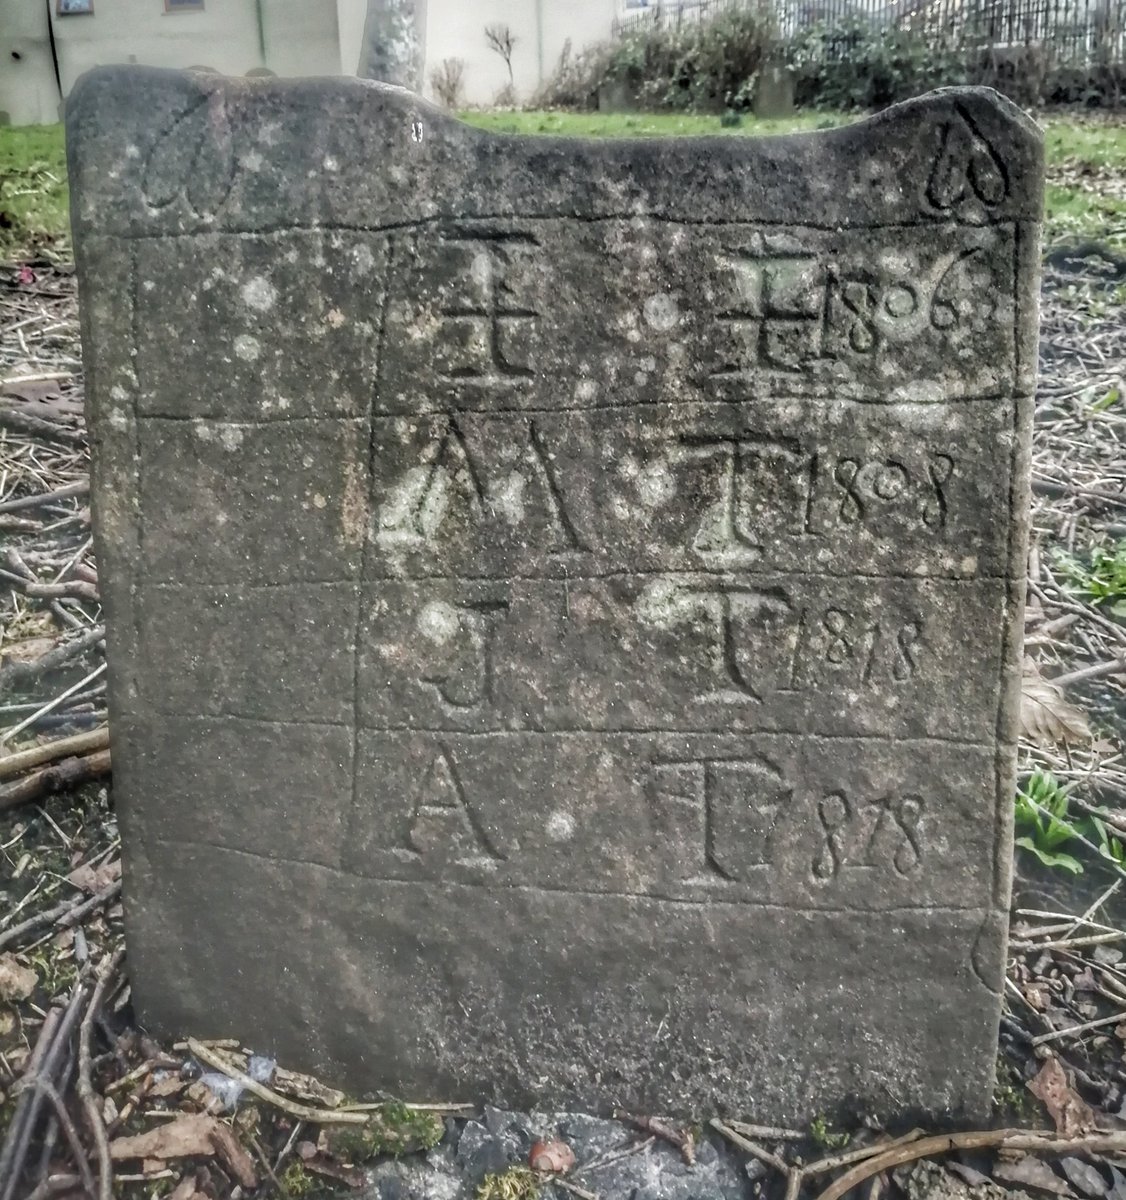 An example of a pauper/low-income gravemarker at St Tydfil's Old Parish Church, Merthyr. #Wales  #History